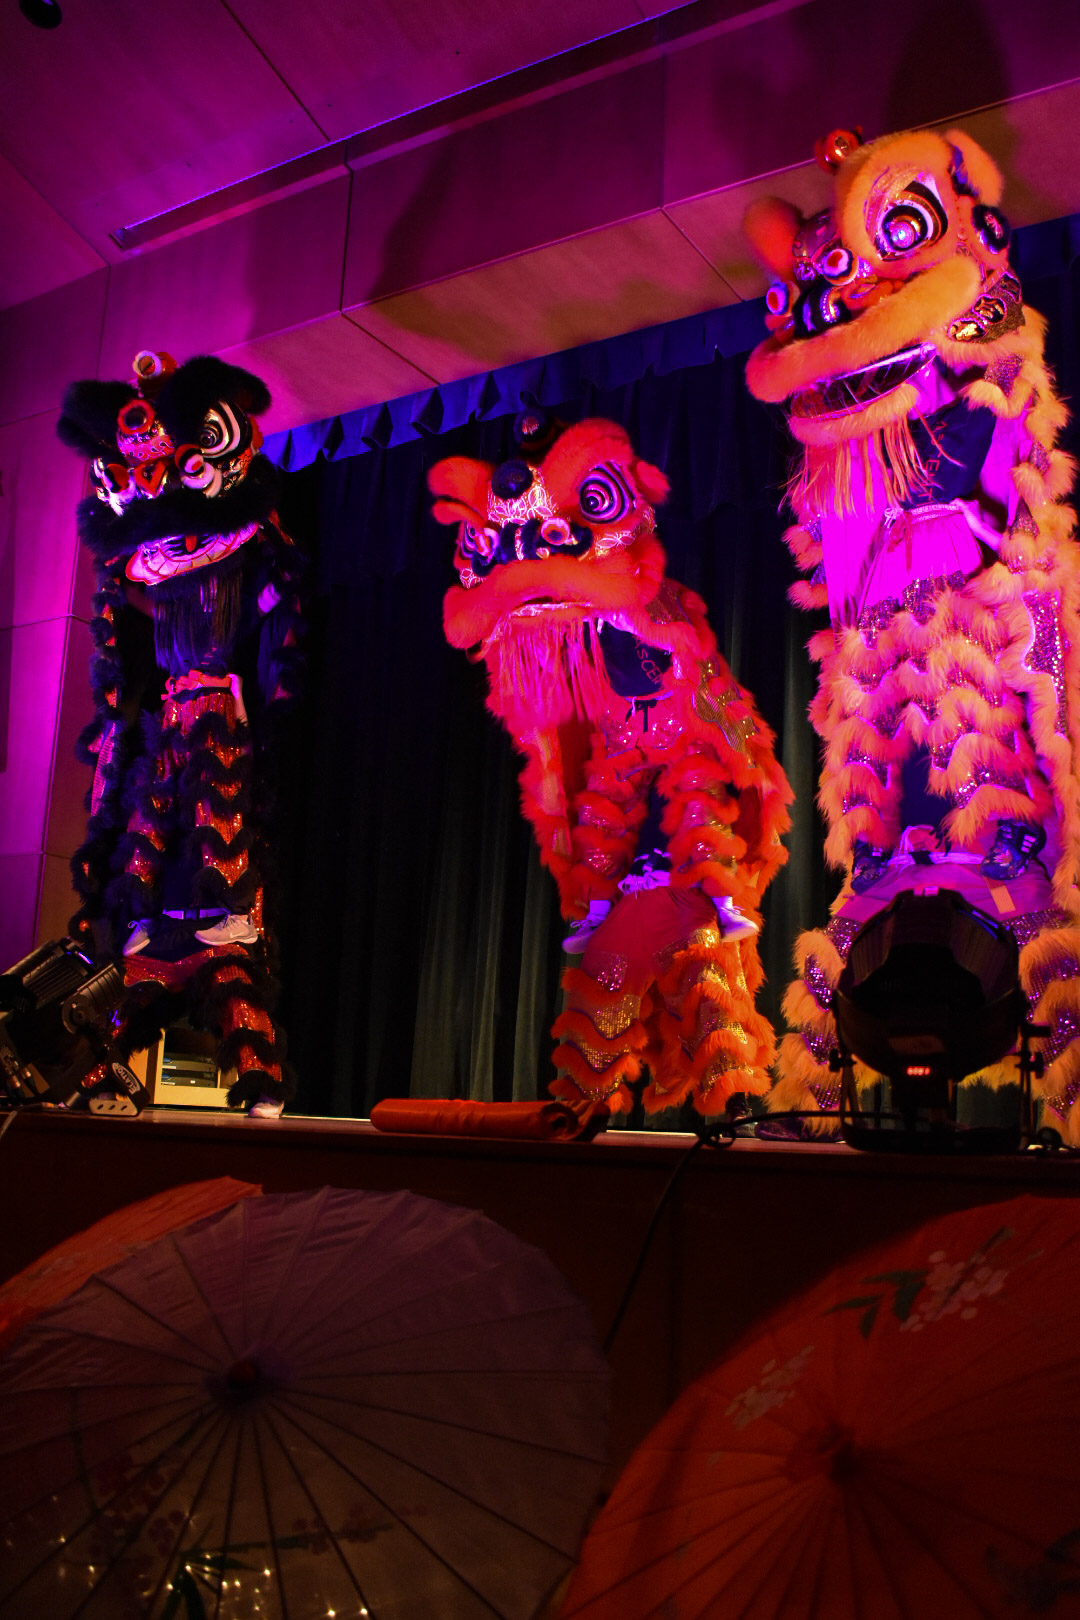 VSA’s Annual Lunar New Year Show celebrates various cultures across Asia